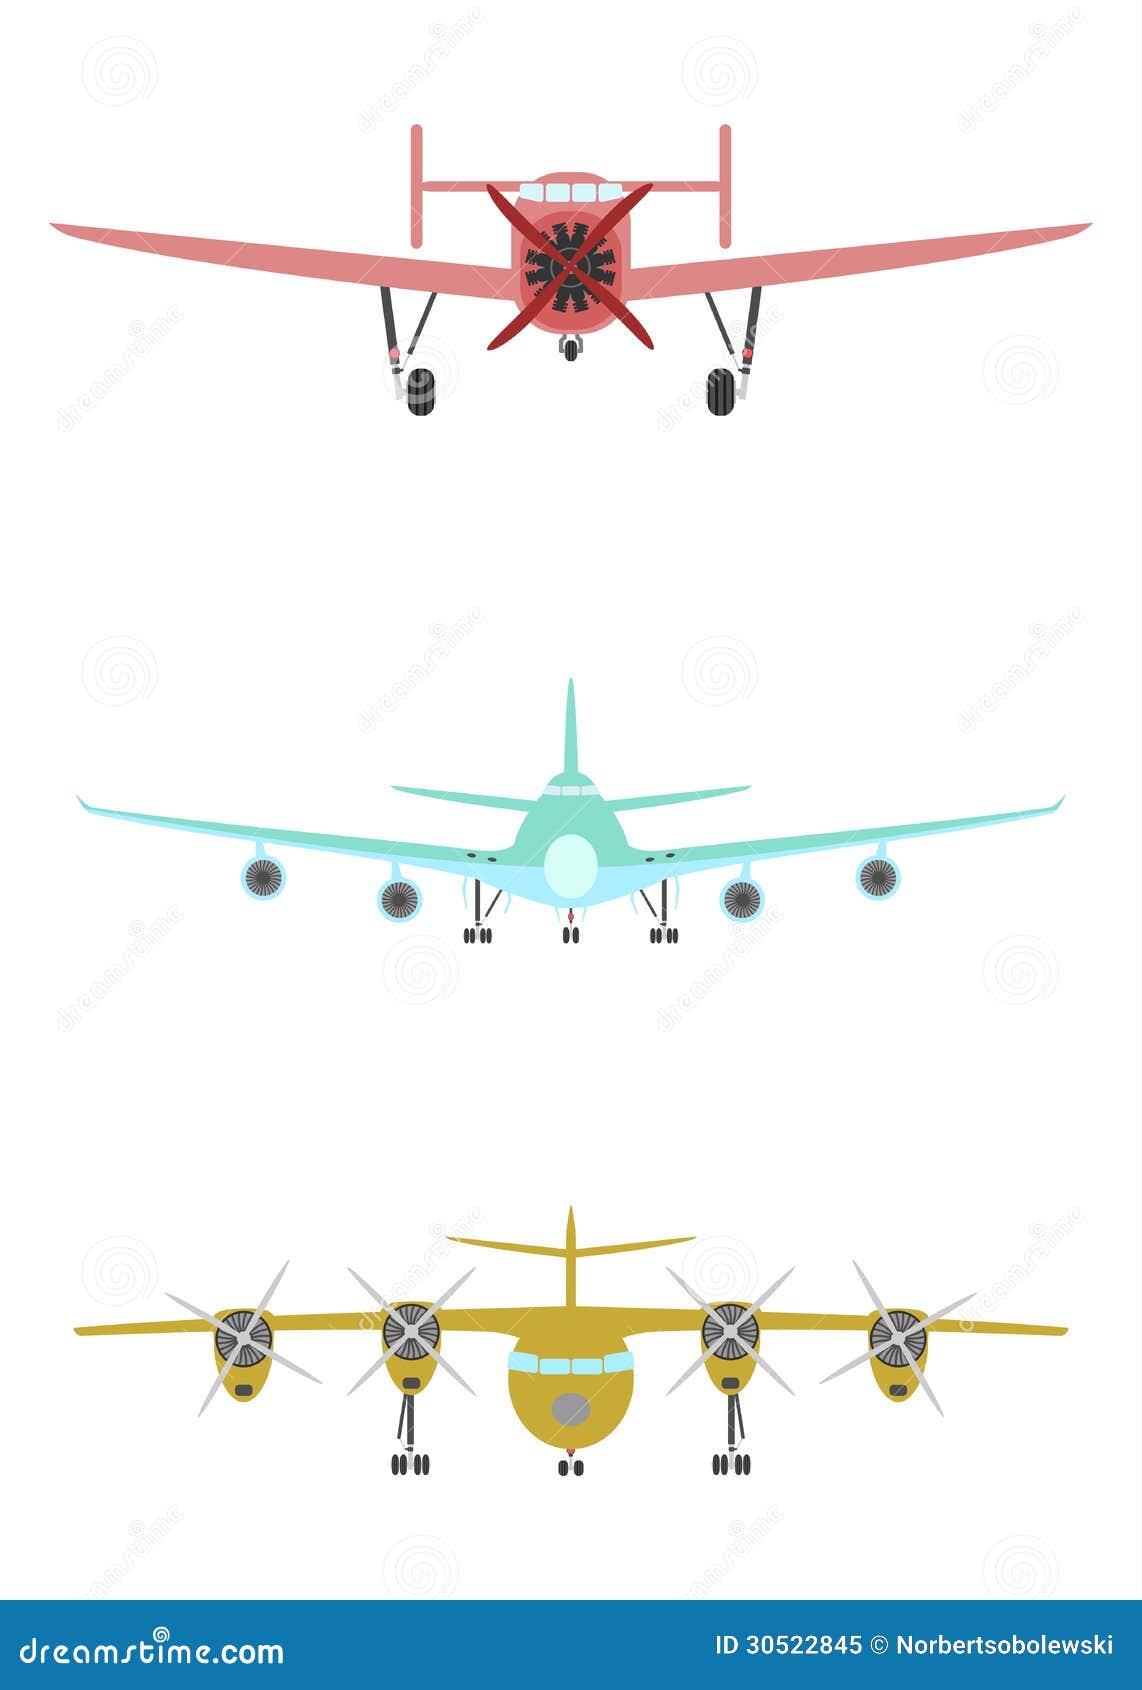 airplane clipart front view - photo #45